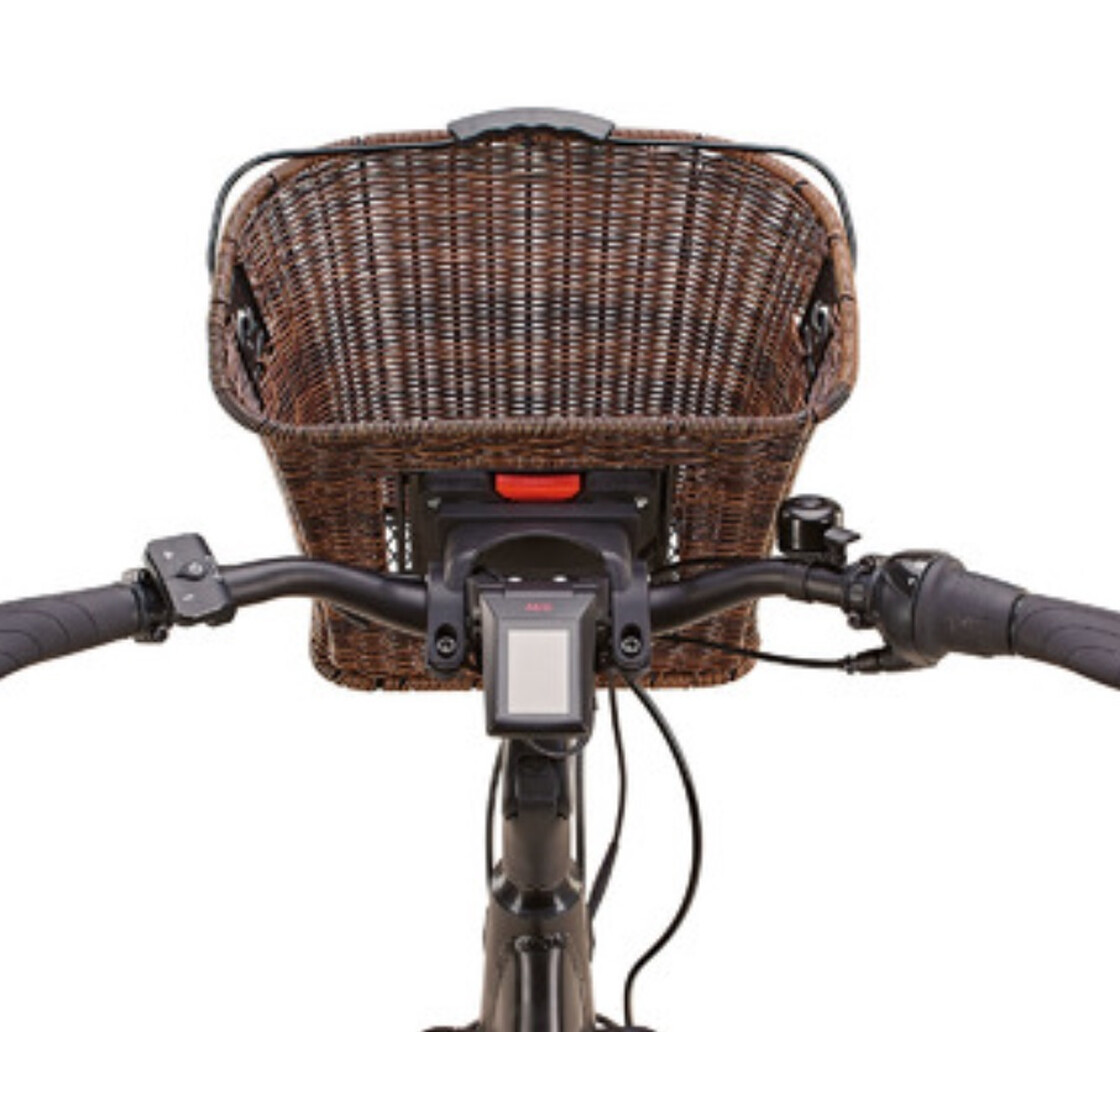 Bicycle - Prophete braided basket 26,99 , - - brown 5403 € Front City shopping